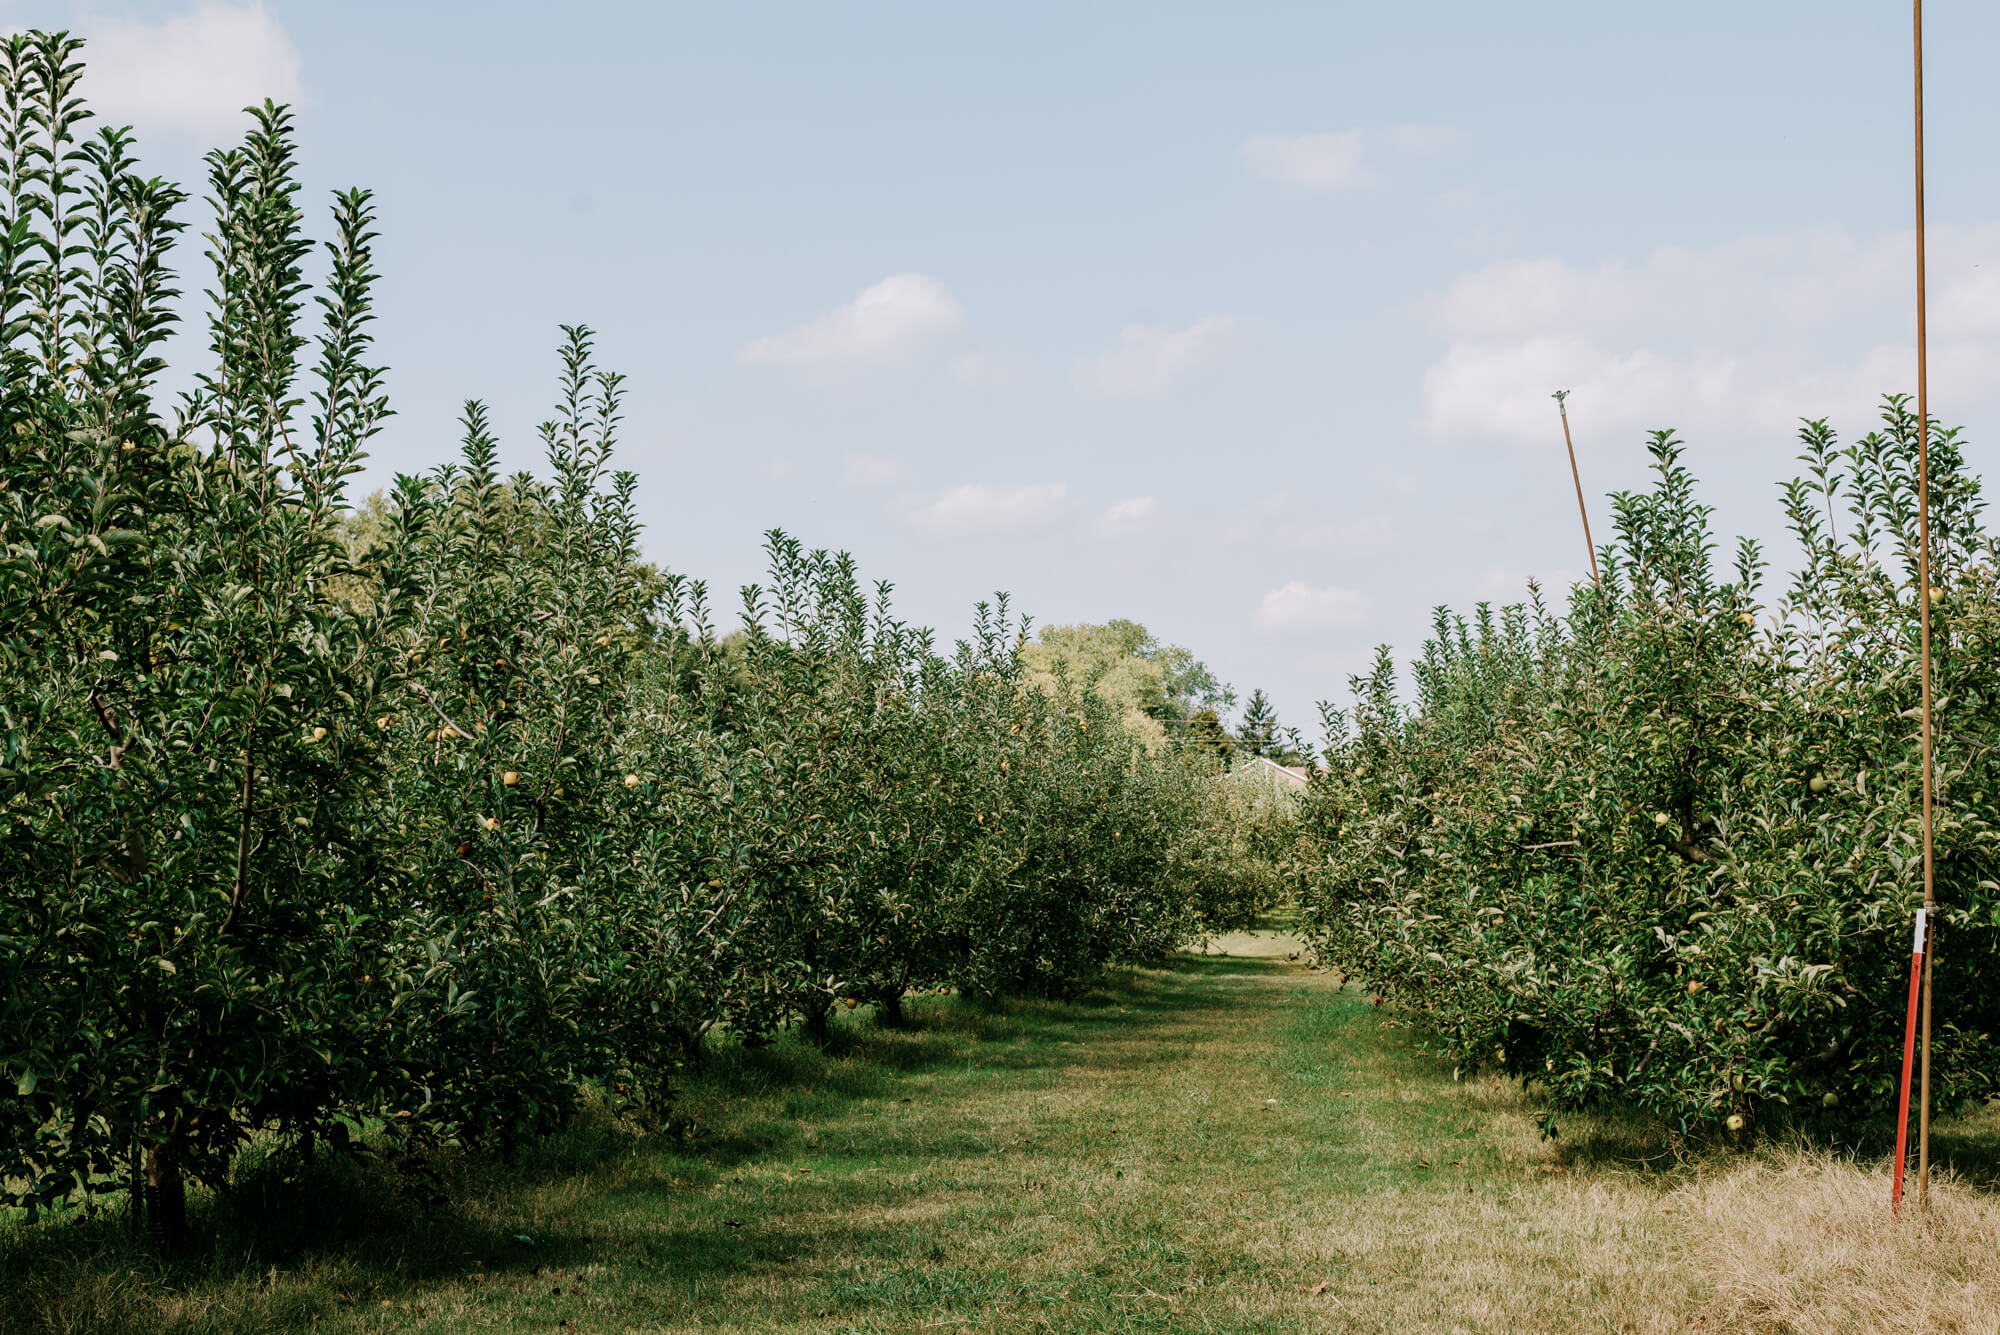 rows of apple trees at scott's orchard alabama